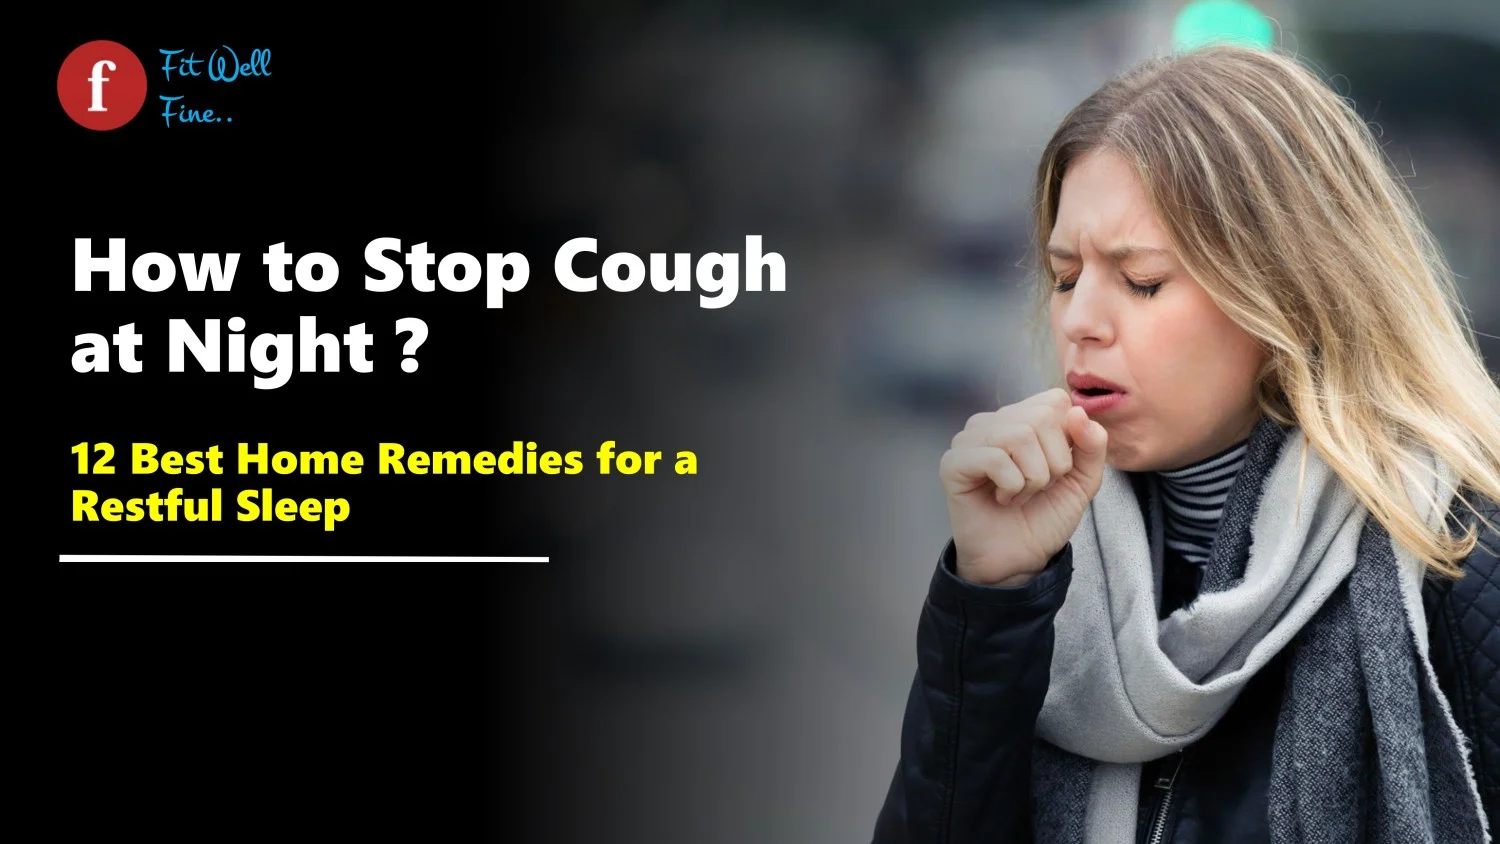 How to stop cough at night naturally